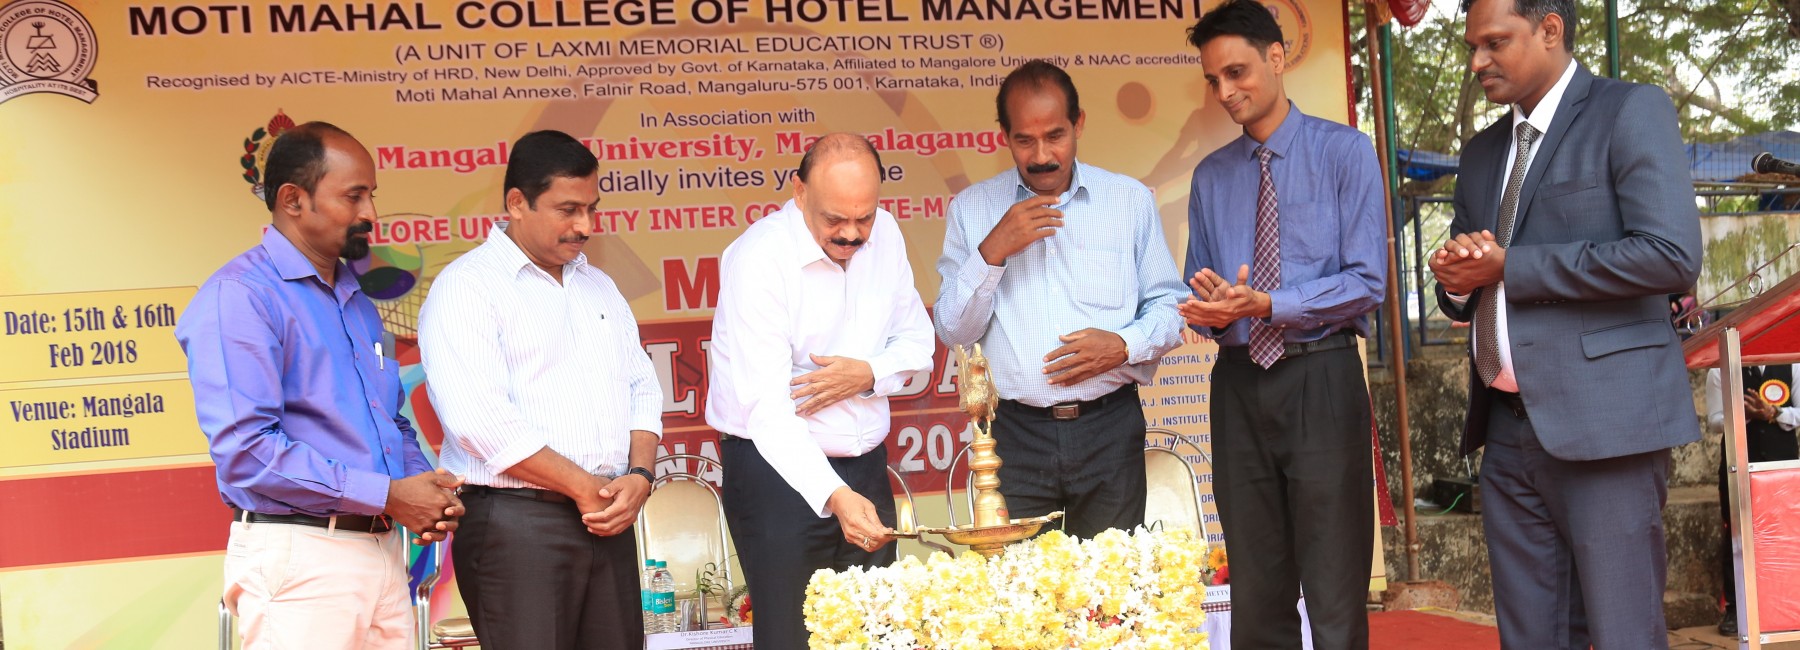 motimahal college of hotel management